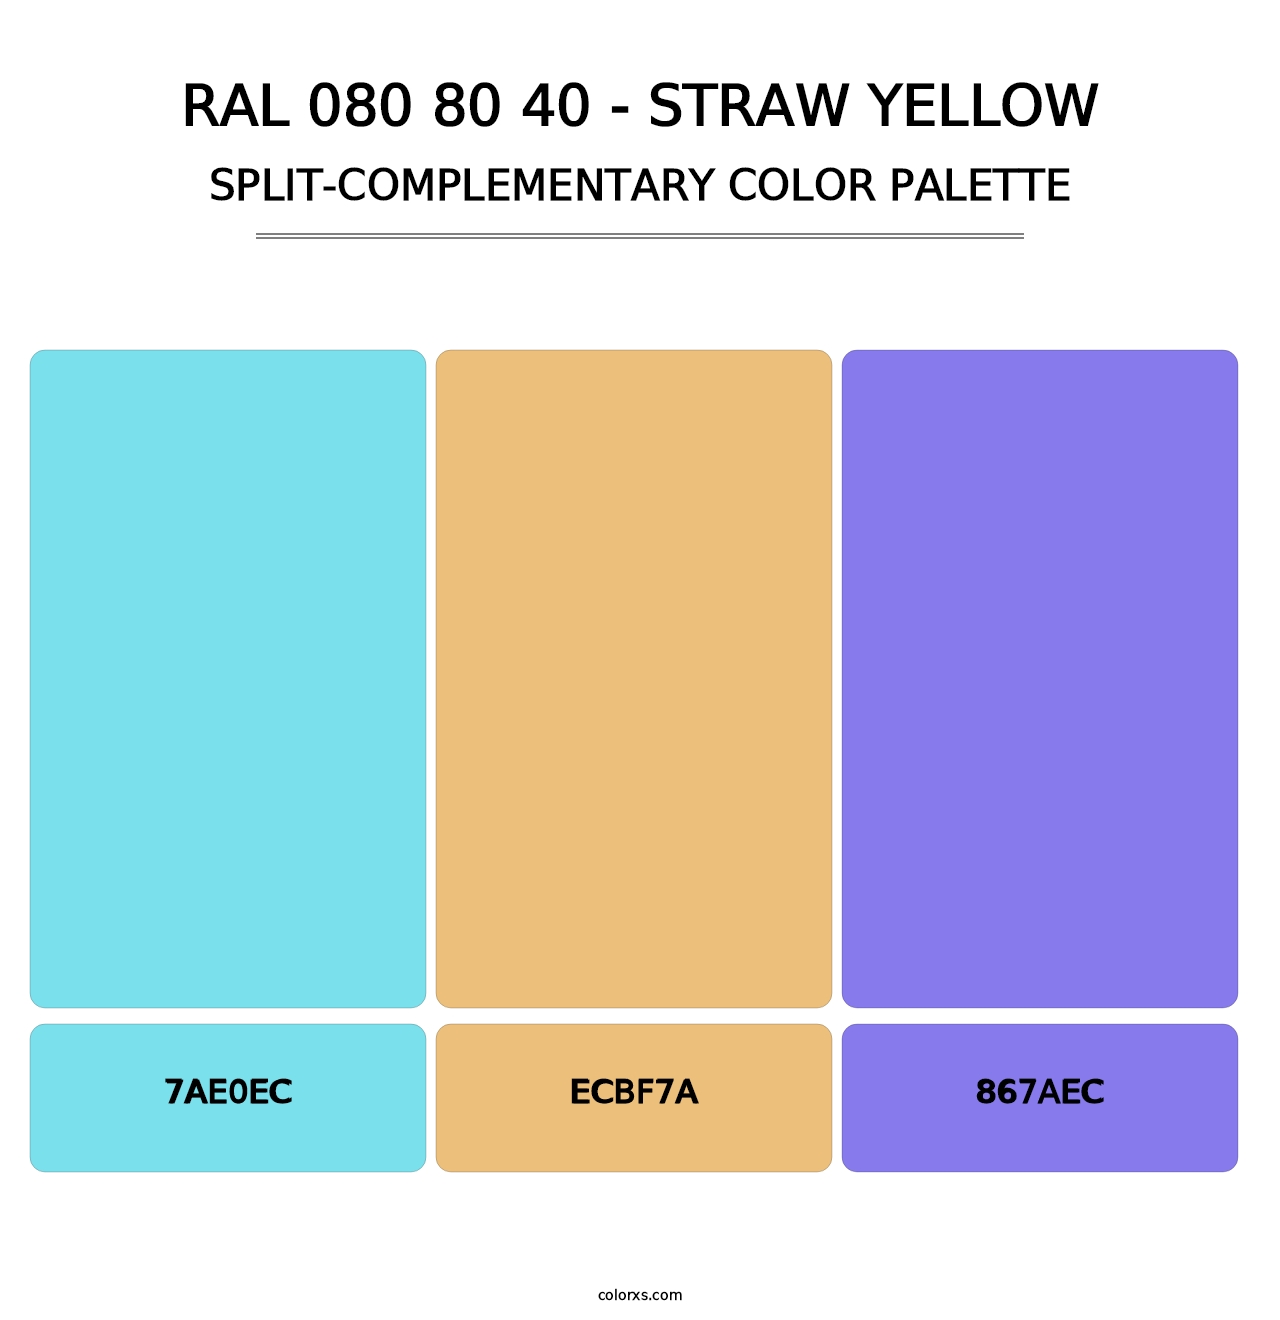 RAL 080 80 40 - Straw Yellow - Split-Complementary Color Palette